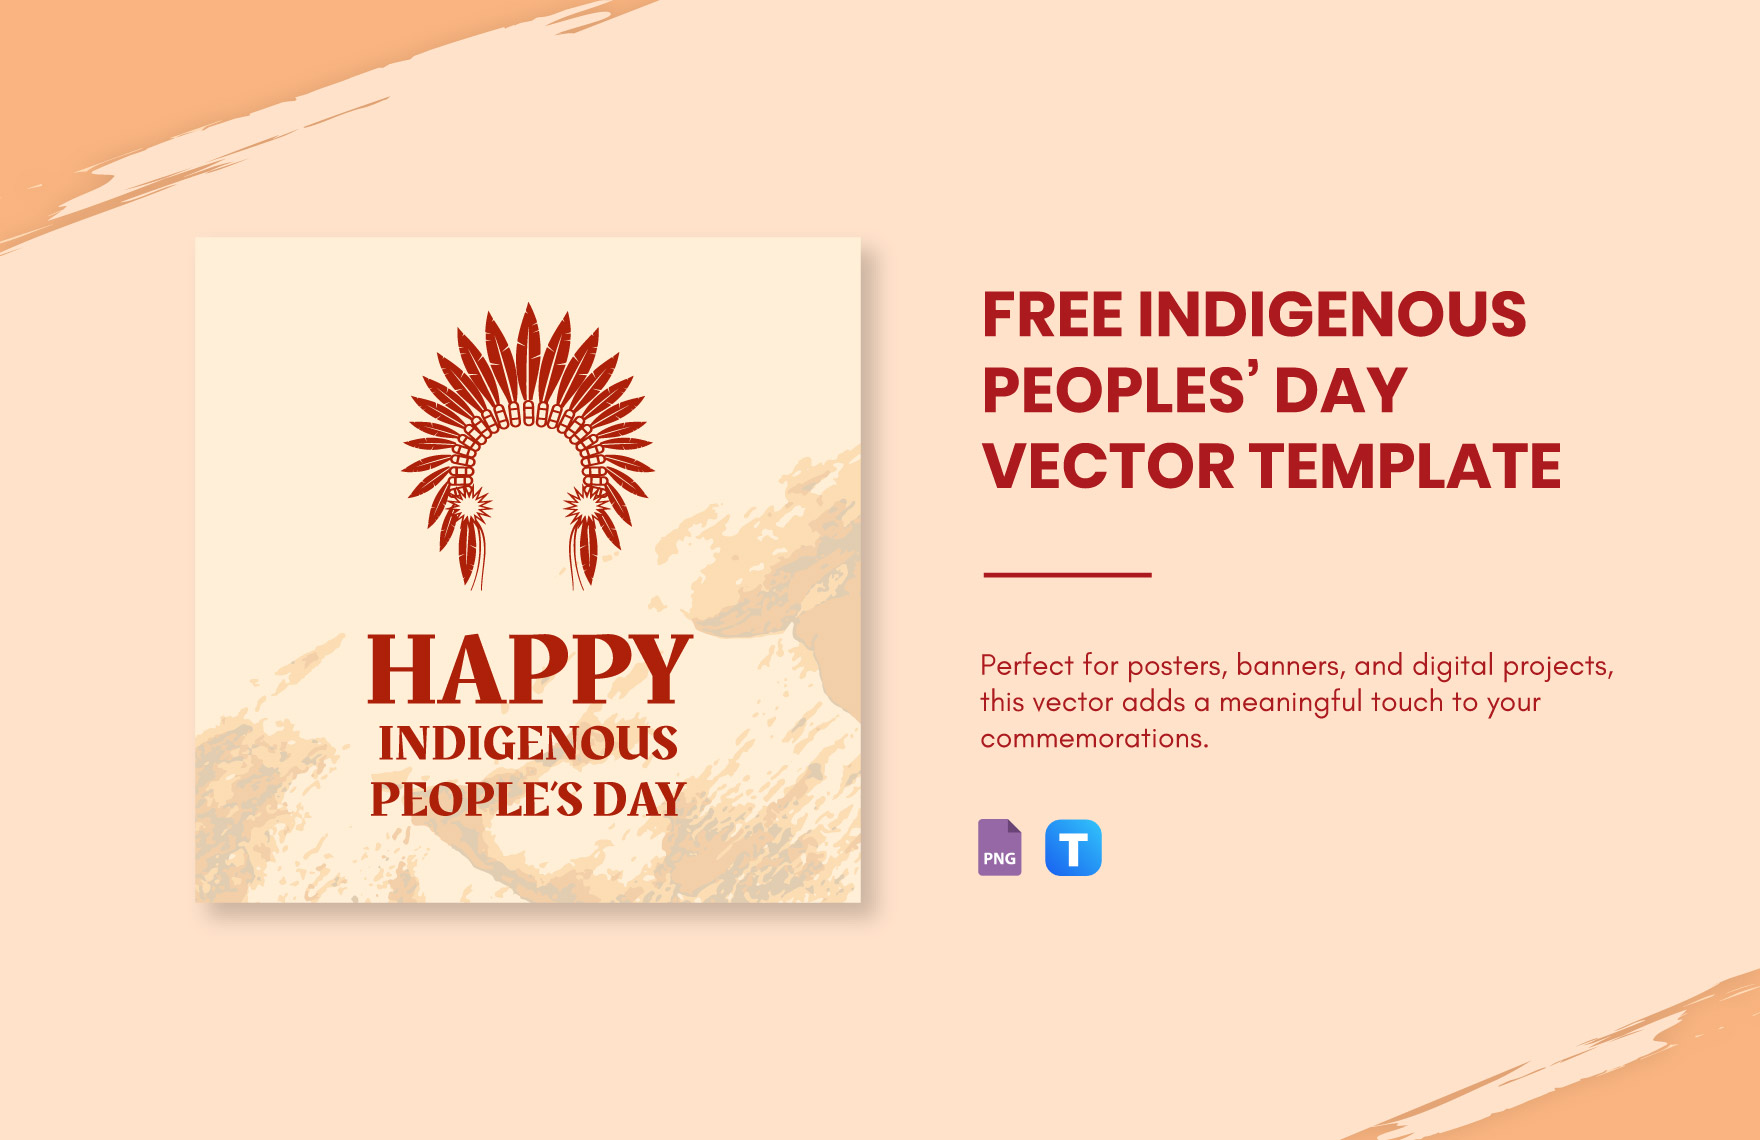 Free Indigenous Peoples' Day Vector in PNG